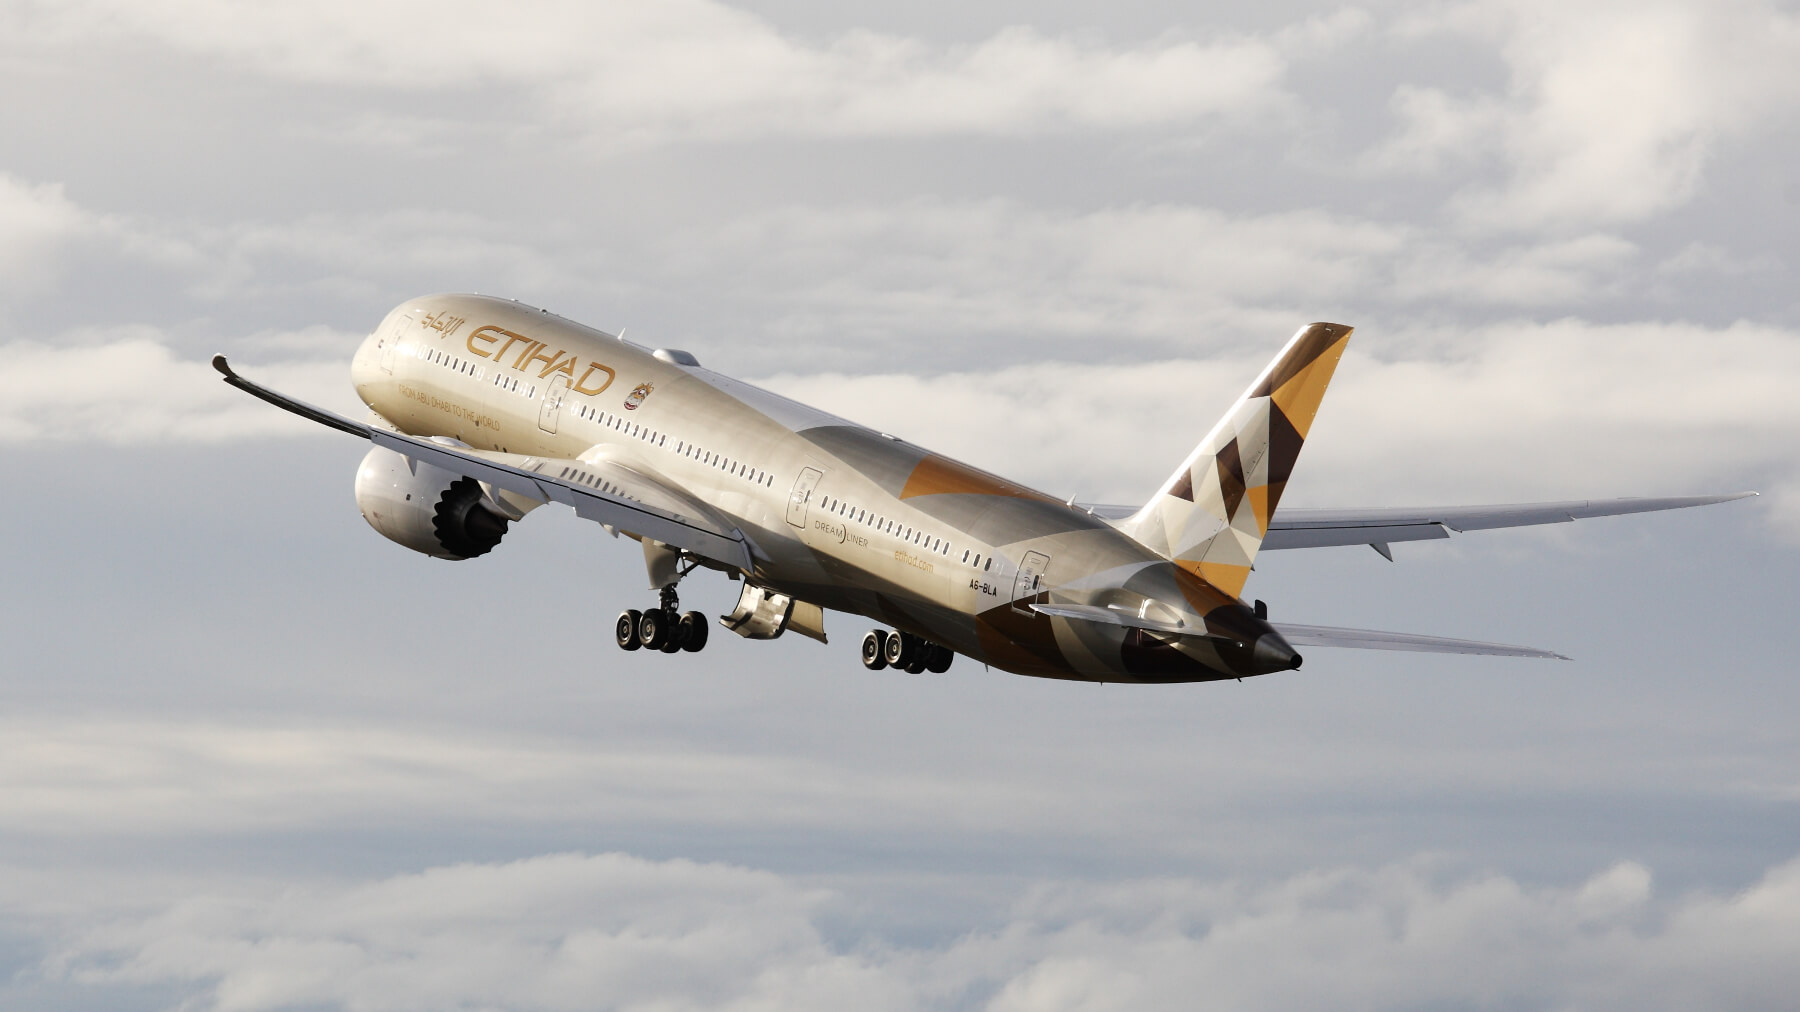 Etihad posts best on time performance since 2009